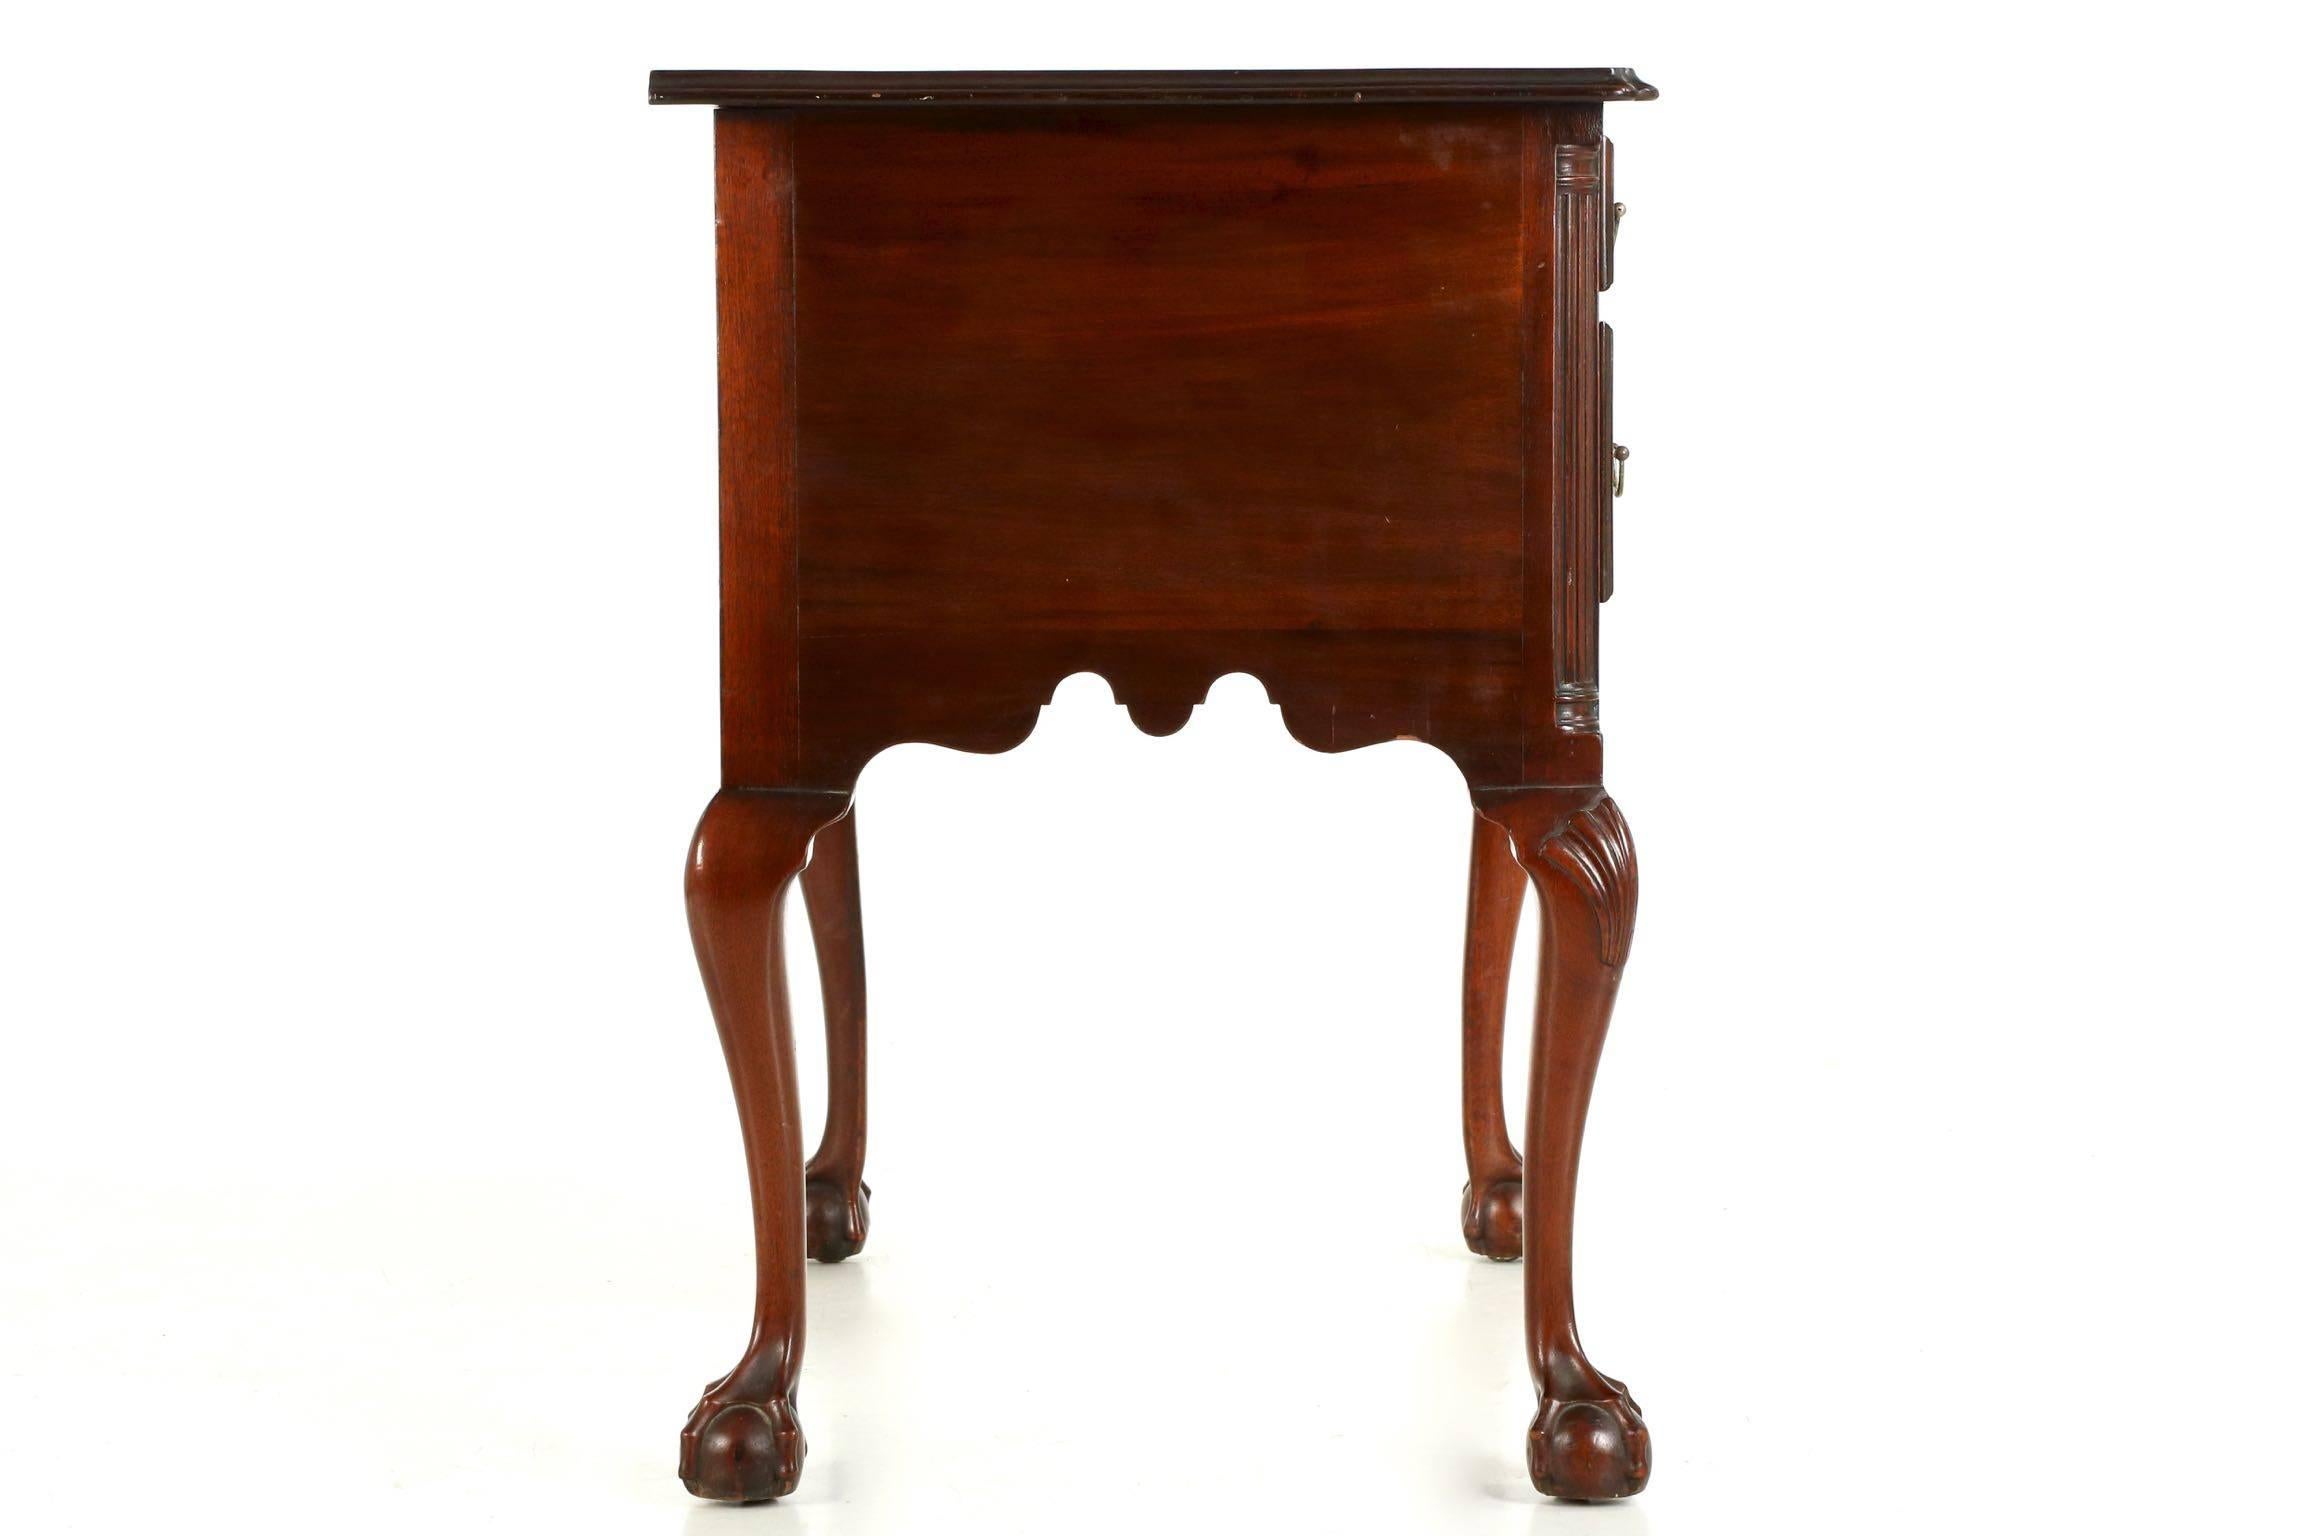 Early 20th Century American Chippendale Style Mahogany Lowboy in the Connecticut Taste